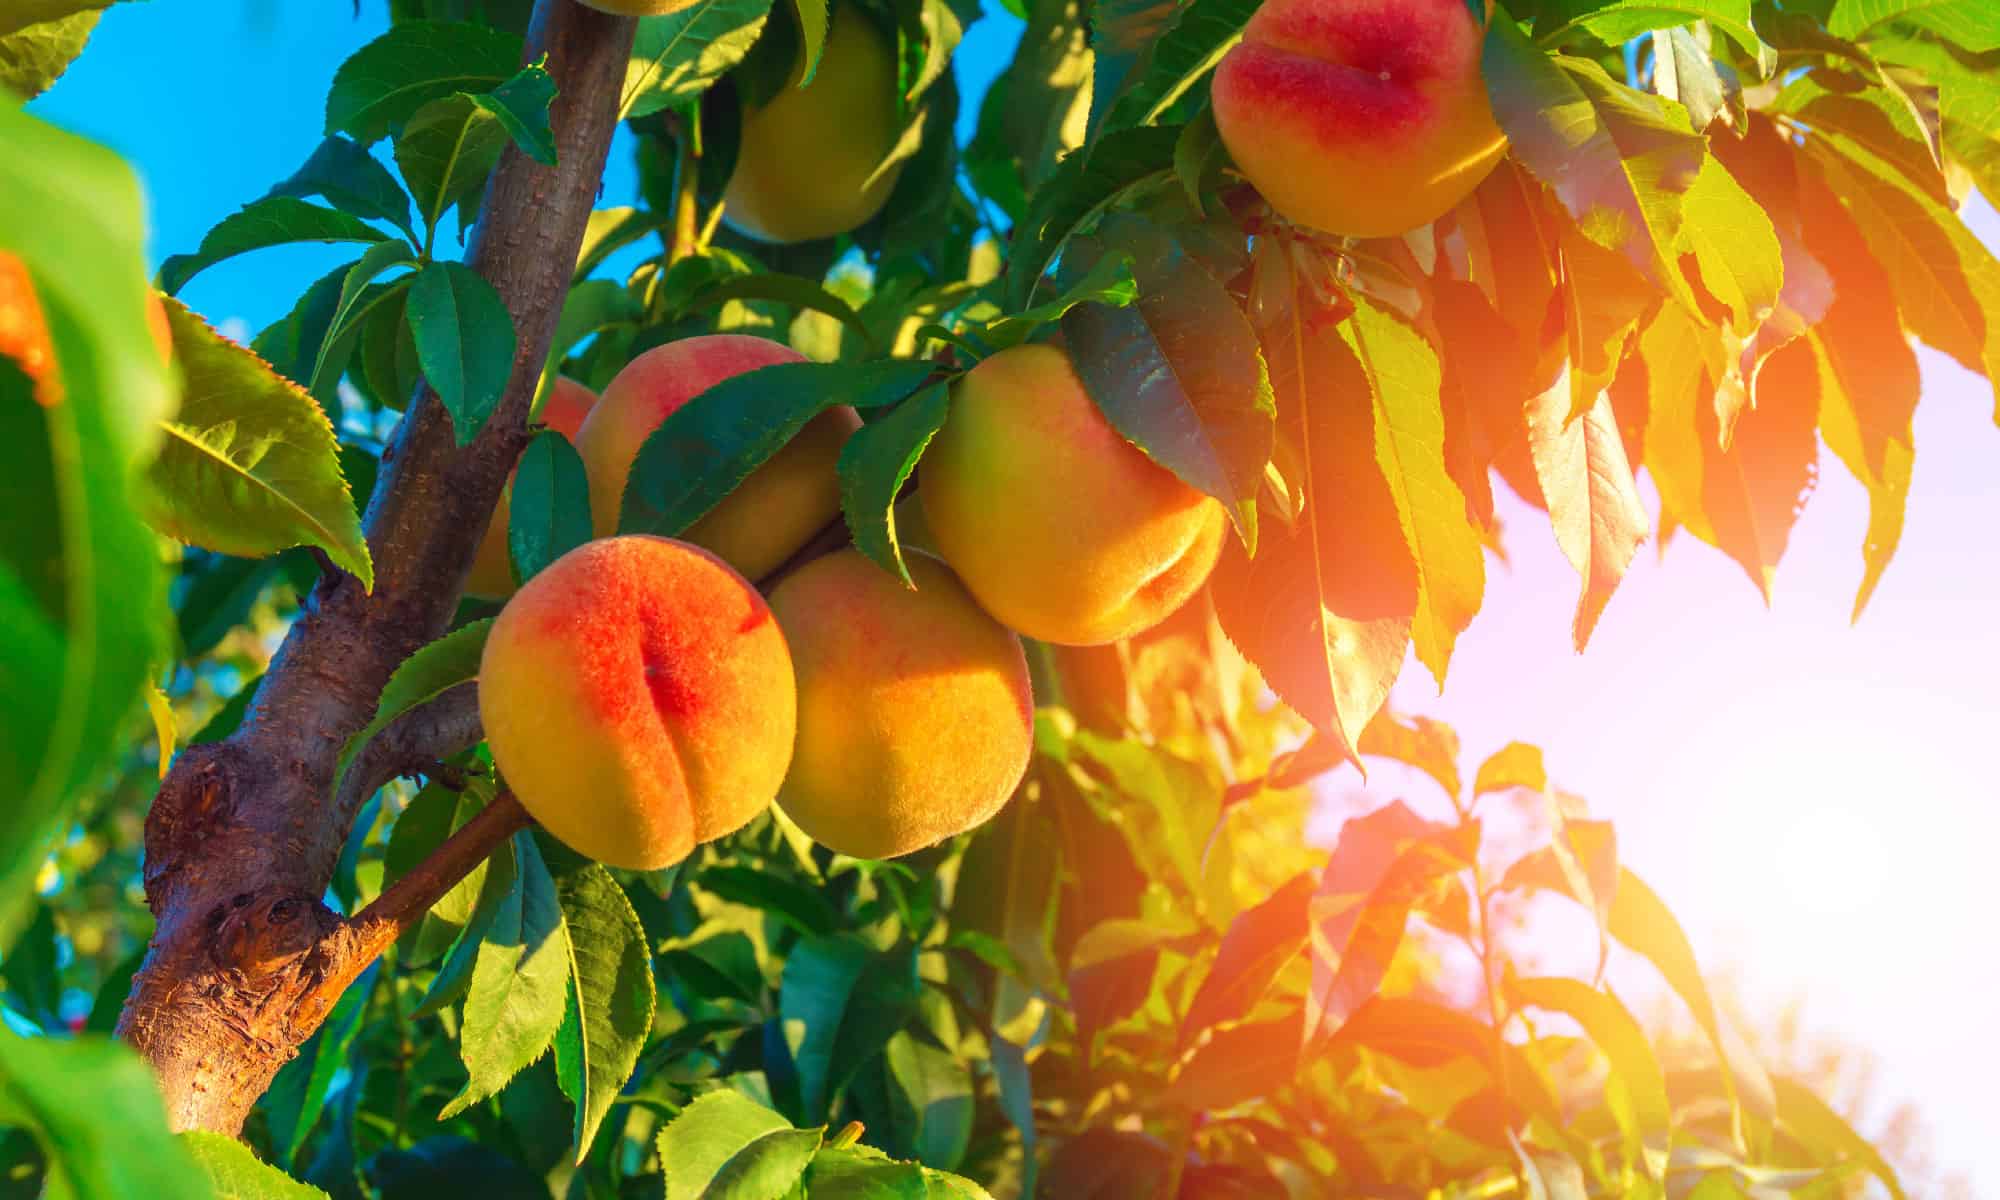 There Are No Georgia Peaches This Year